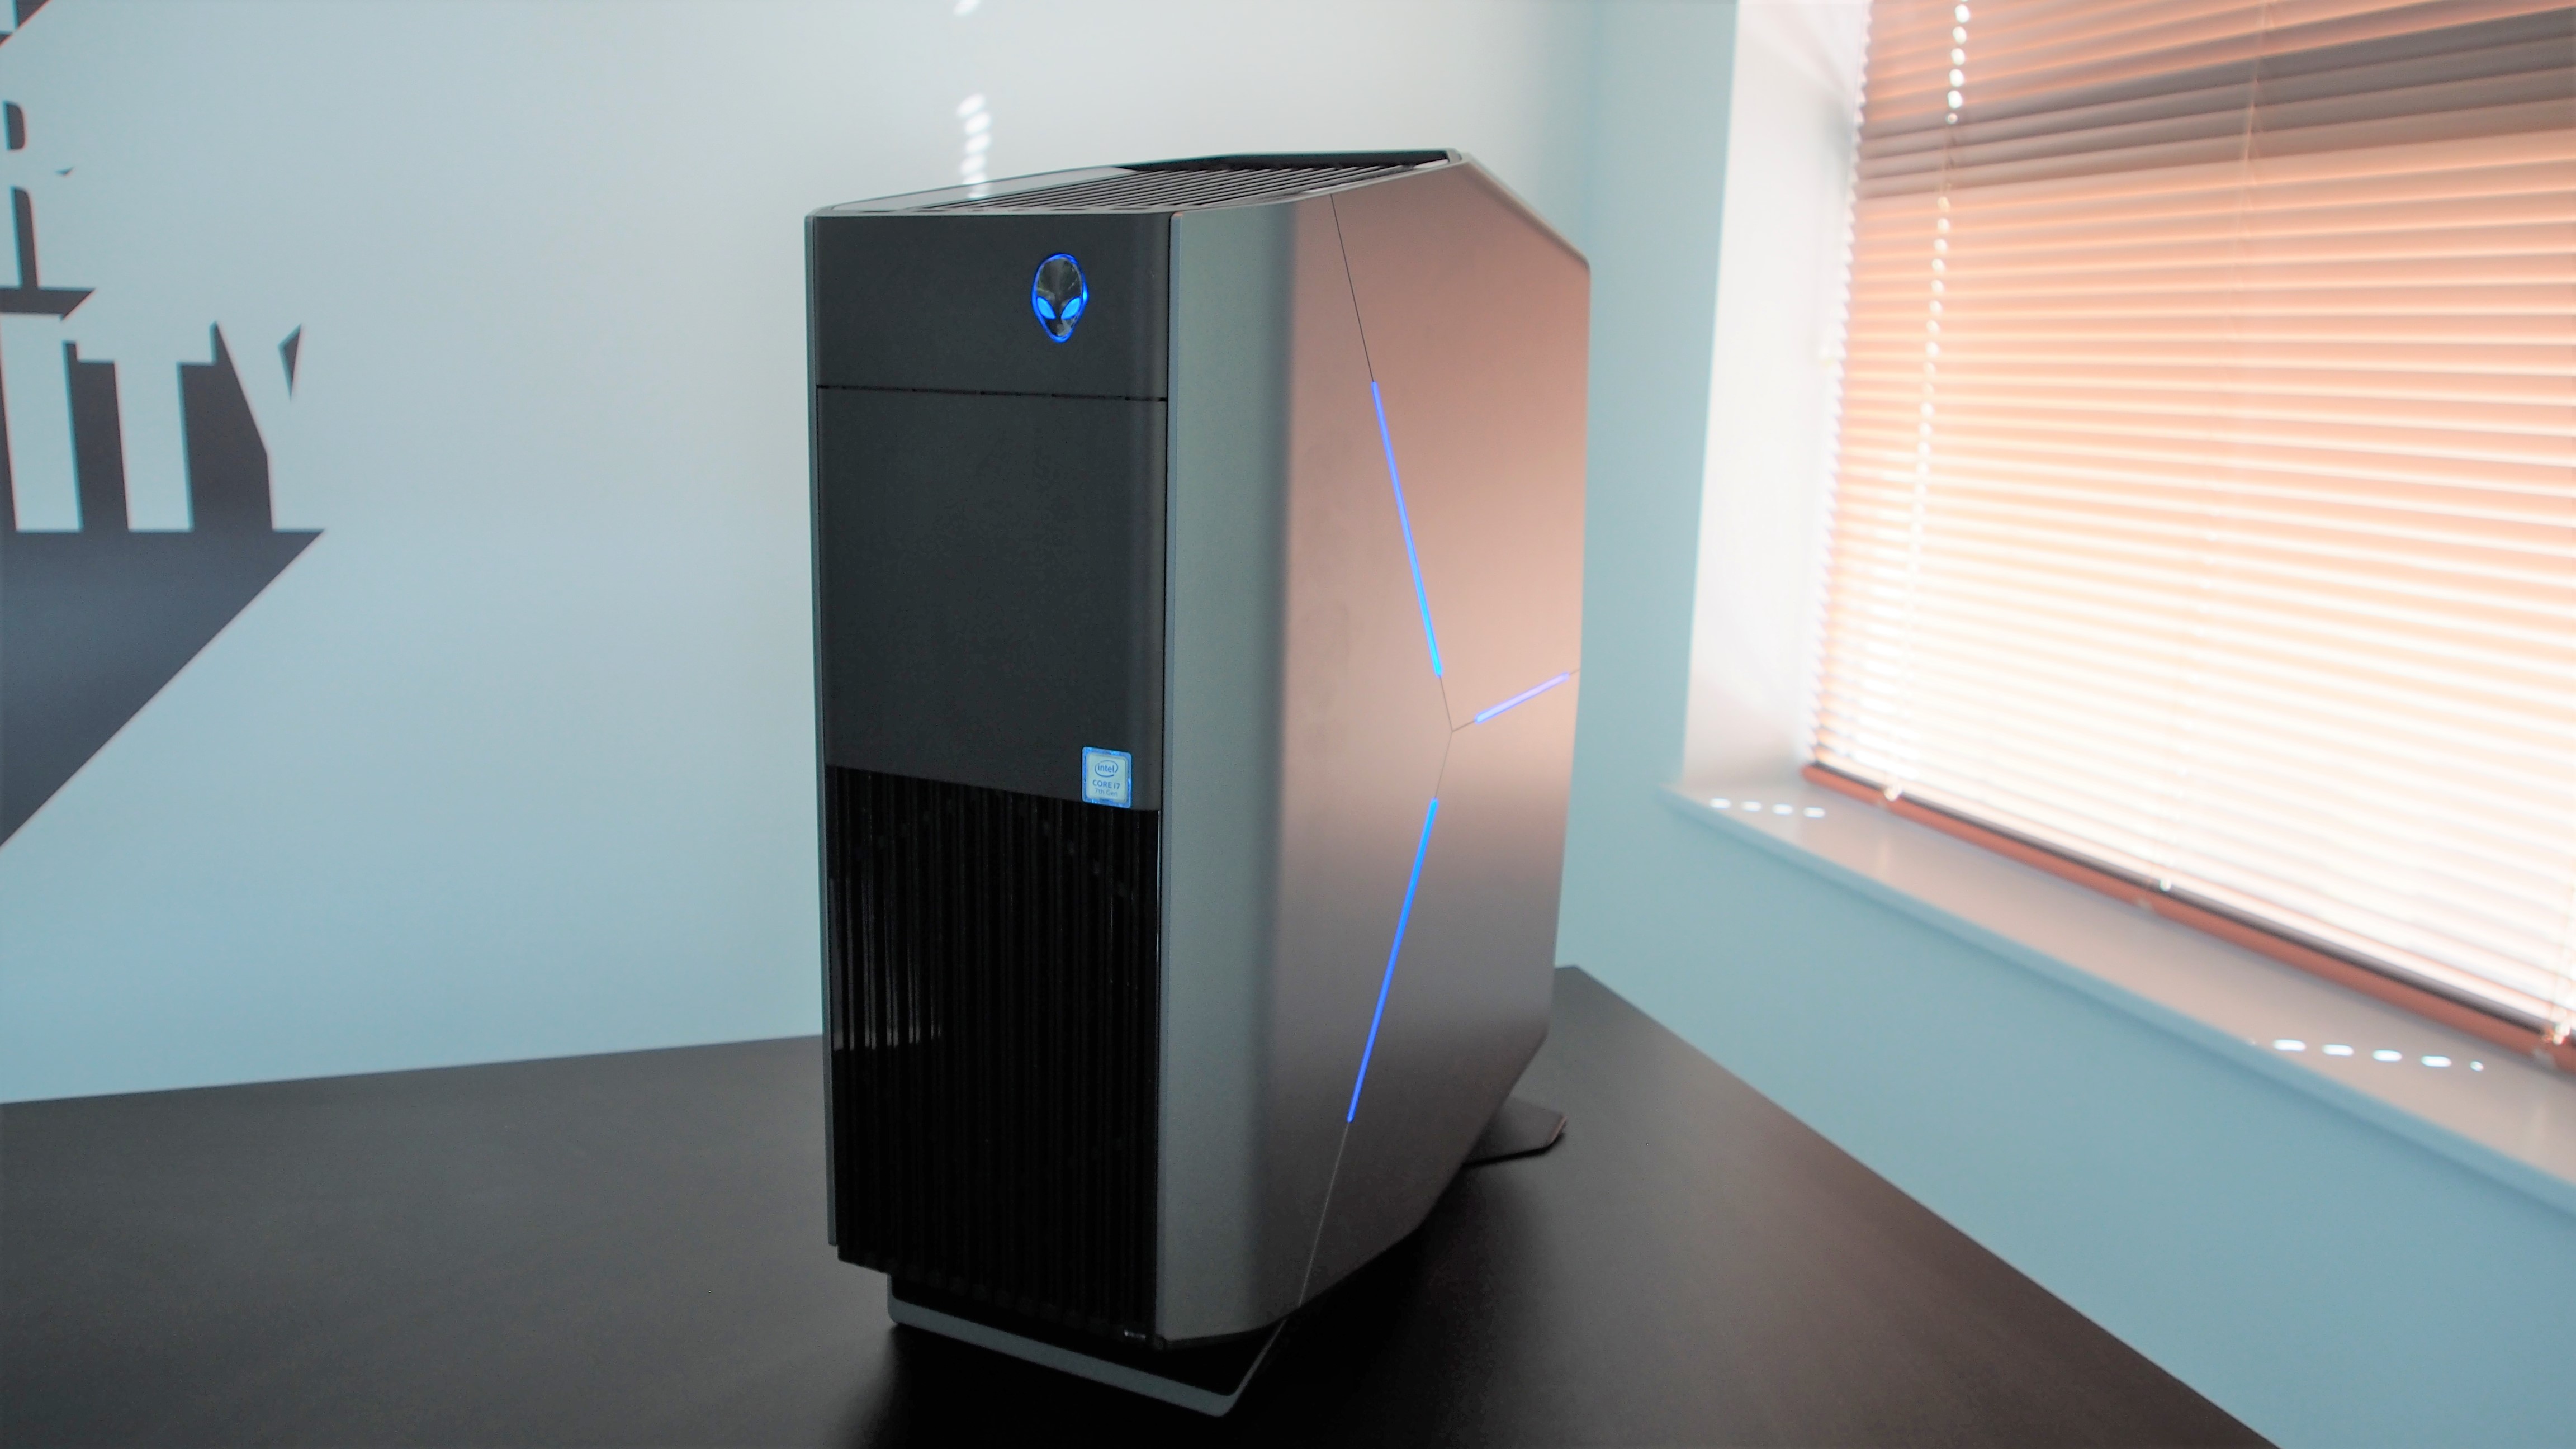 best gaming pc